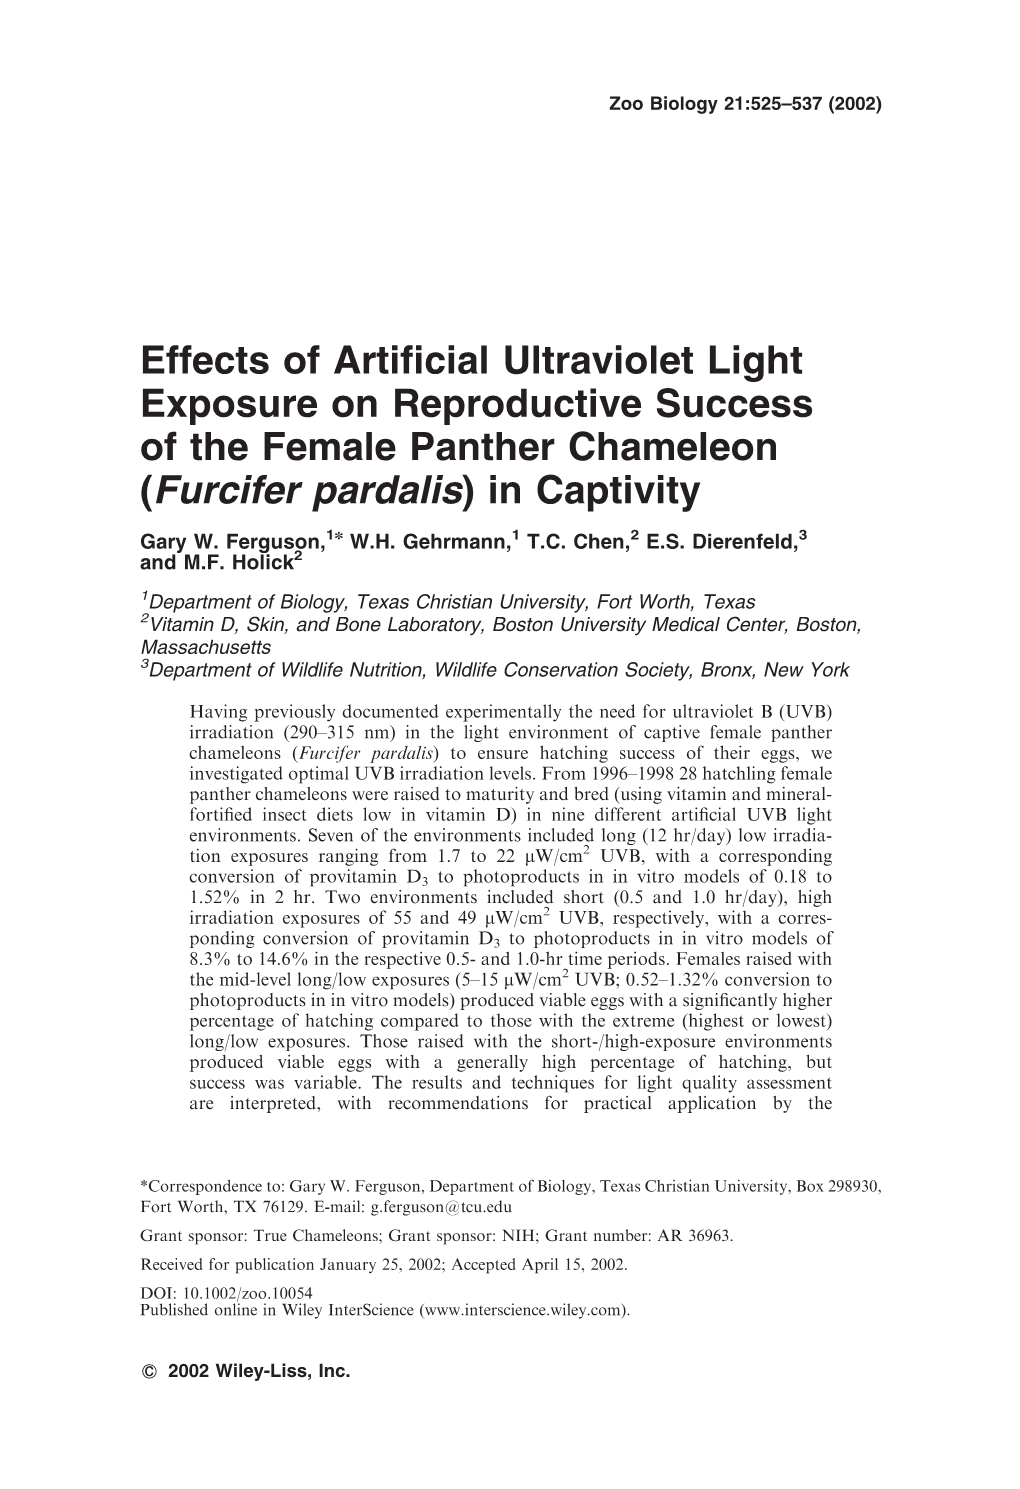 Effects of Artificial Ultraviolet Light Exposure on Reproductive Success of the Female Panther Chameleon (Furcifer Pardalis) In